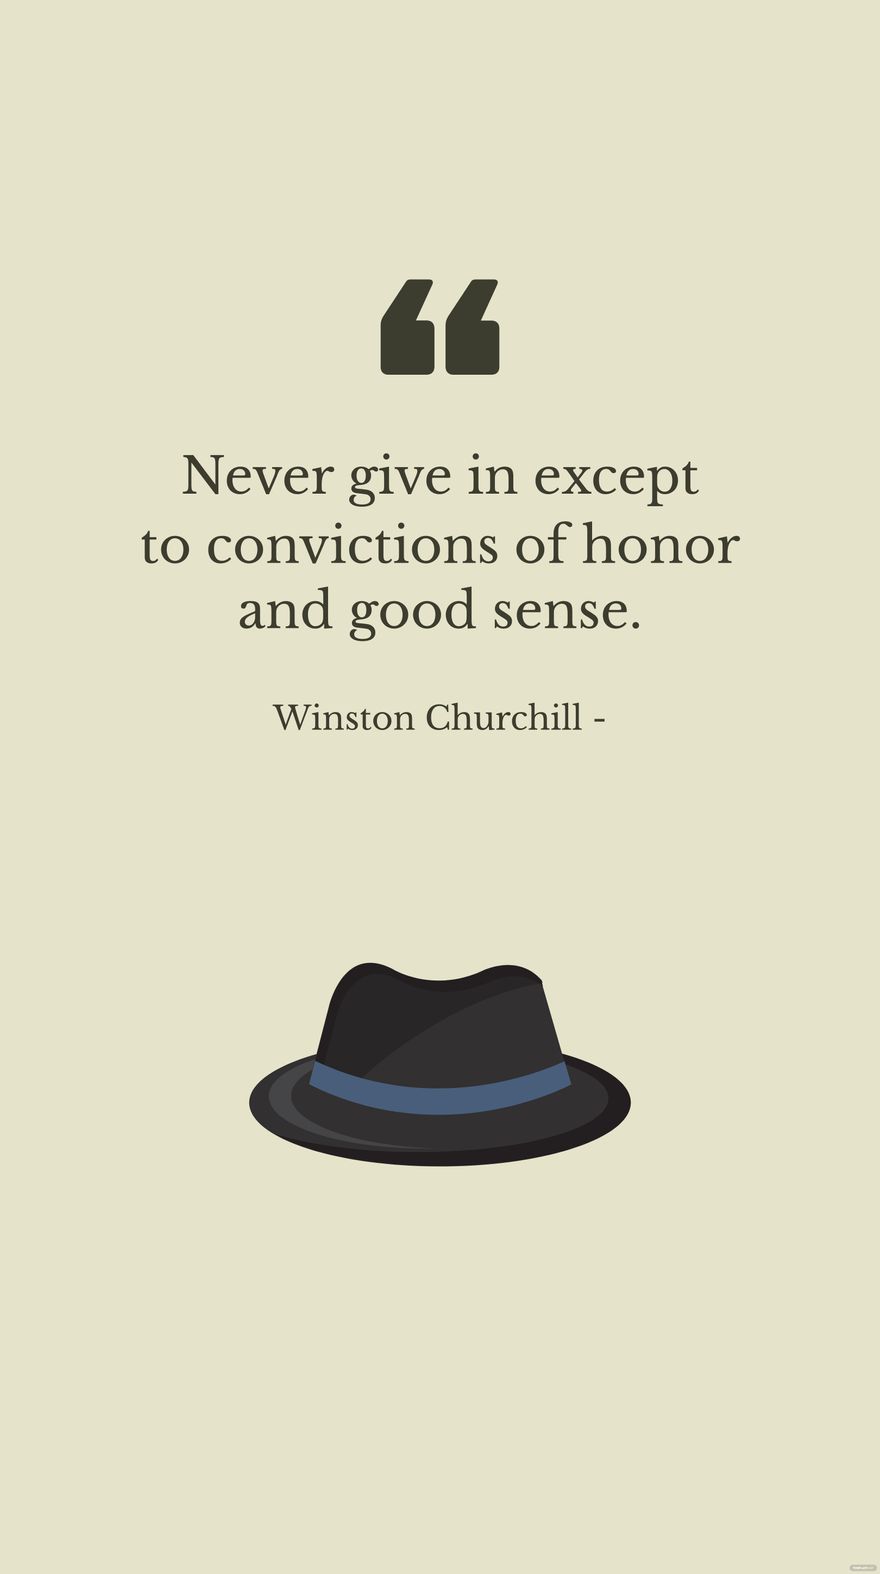 Free Winston Churchill - Never give in except to convictions of honor and good sense. in JPG